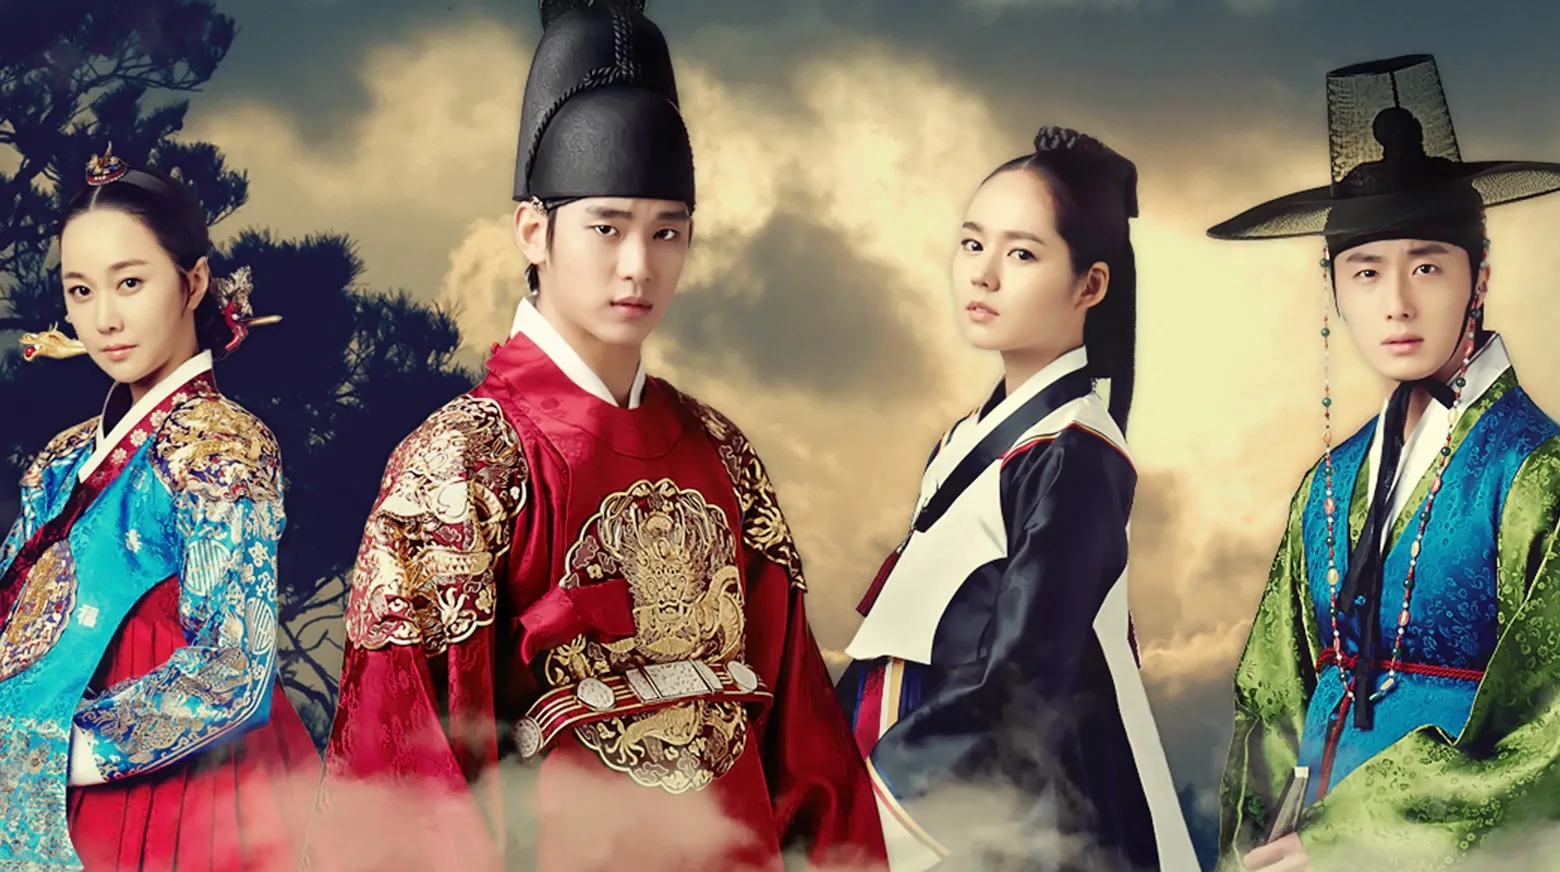 The Moon embracing the sun Poster